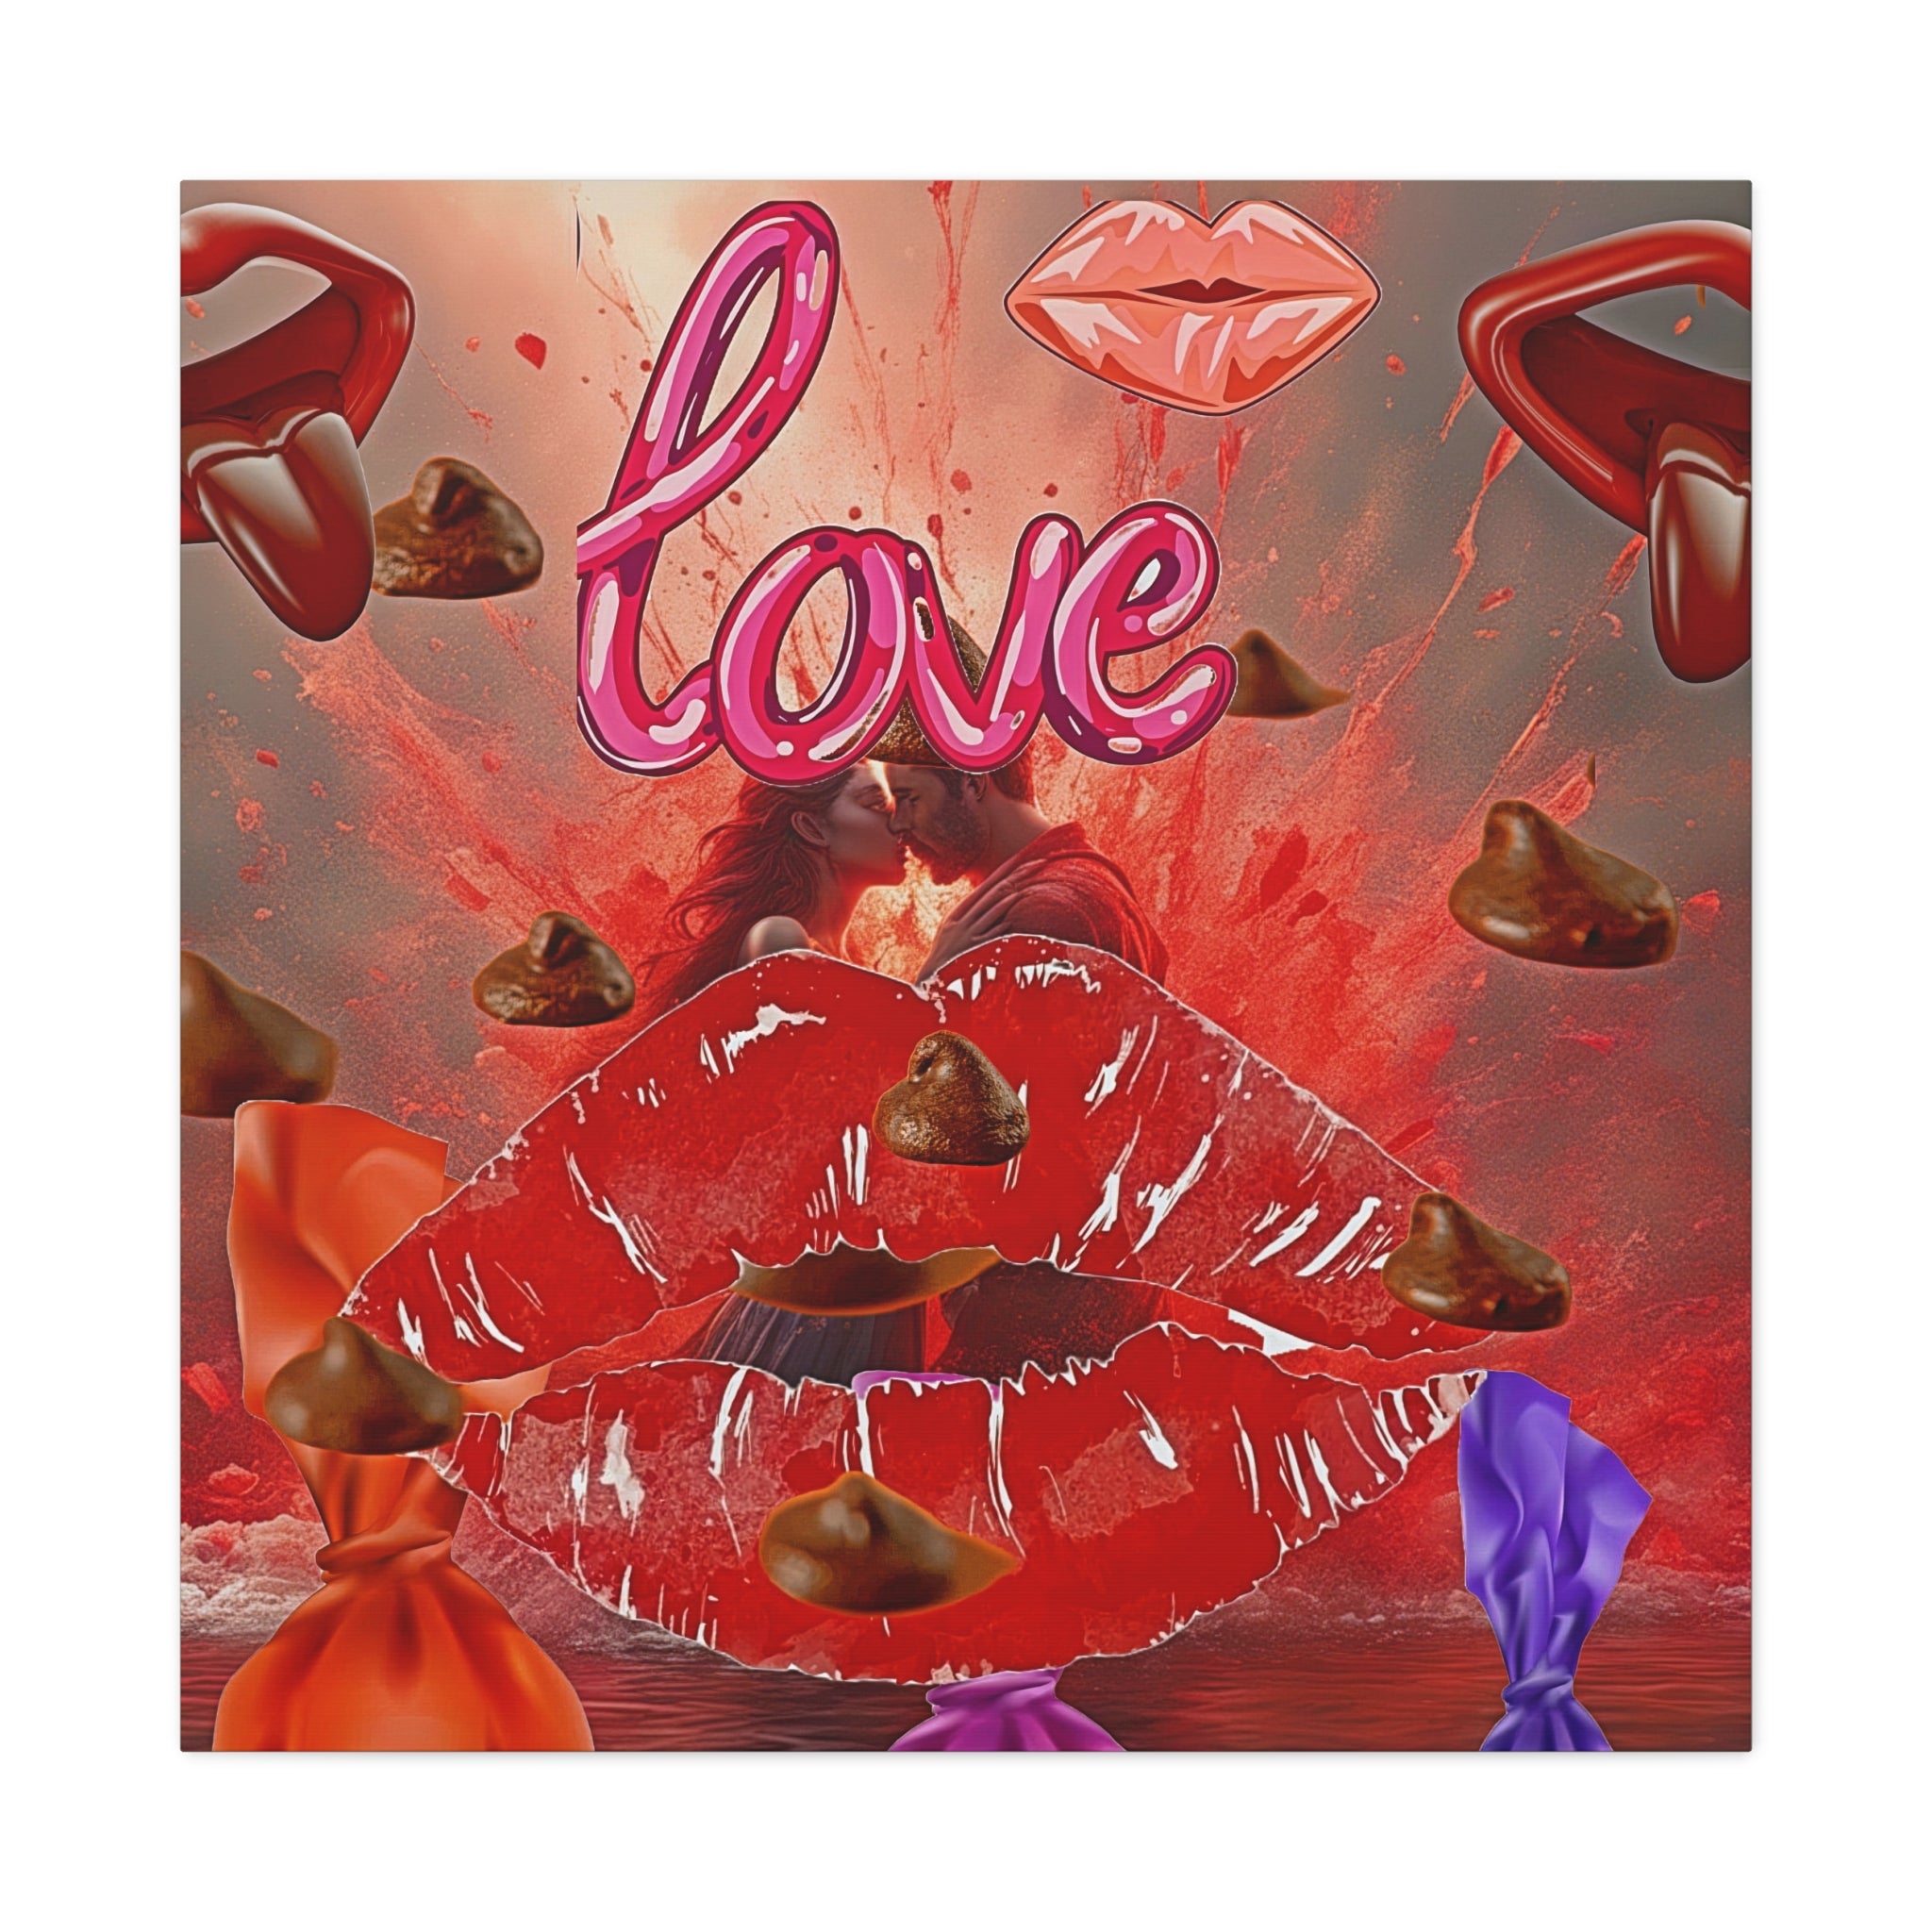 Wall Art LOVE KISSES CHOCOLATE Canvas Print Painting Original Giclee 32X32 GW Love Nice Beauty Fun Design Fit Hot House Home Office Gift Ready Hang